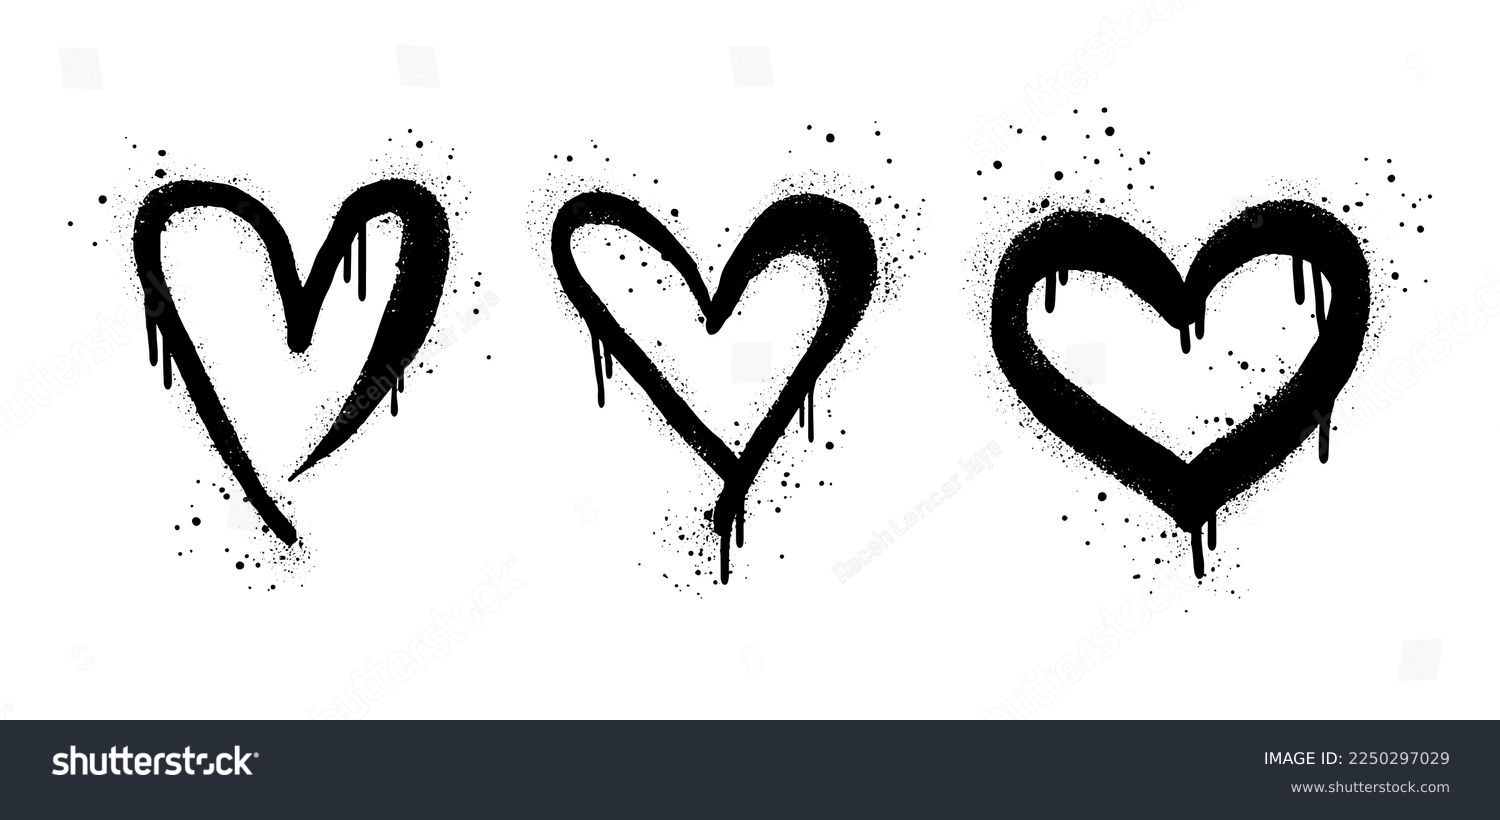 SVG of collection of Spray painted graffiti heart sign in black over white. Love heart drip symbol.  isolated on white background. vector illustration svg